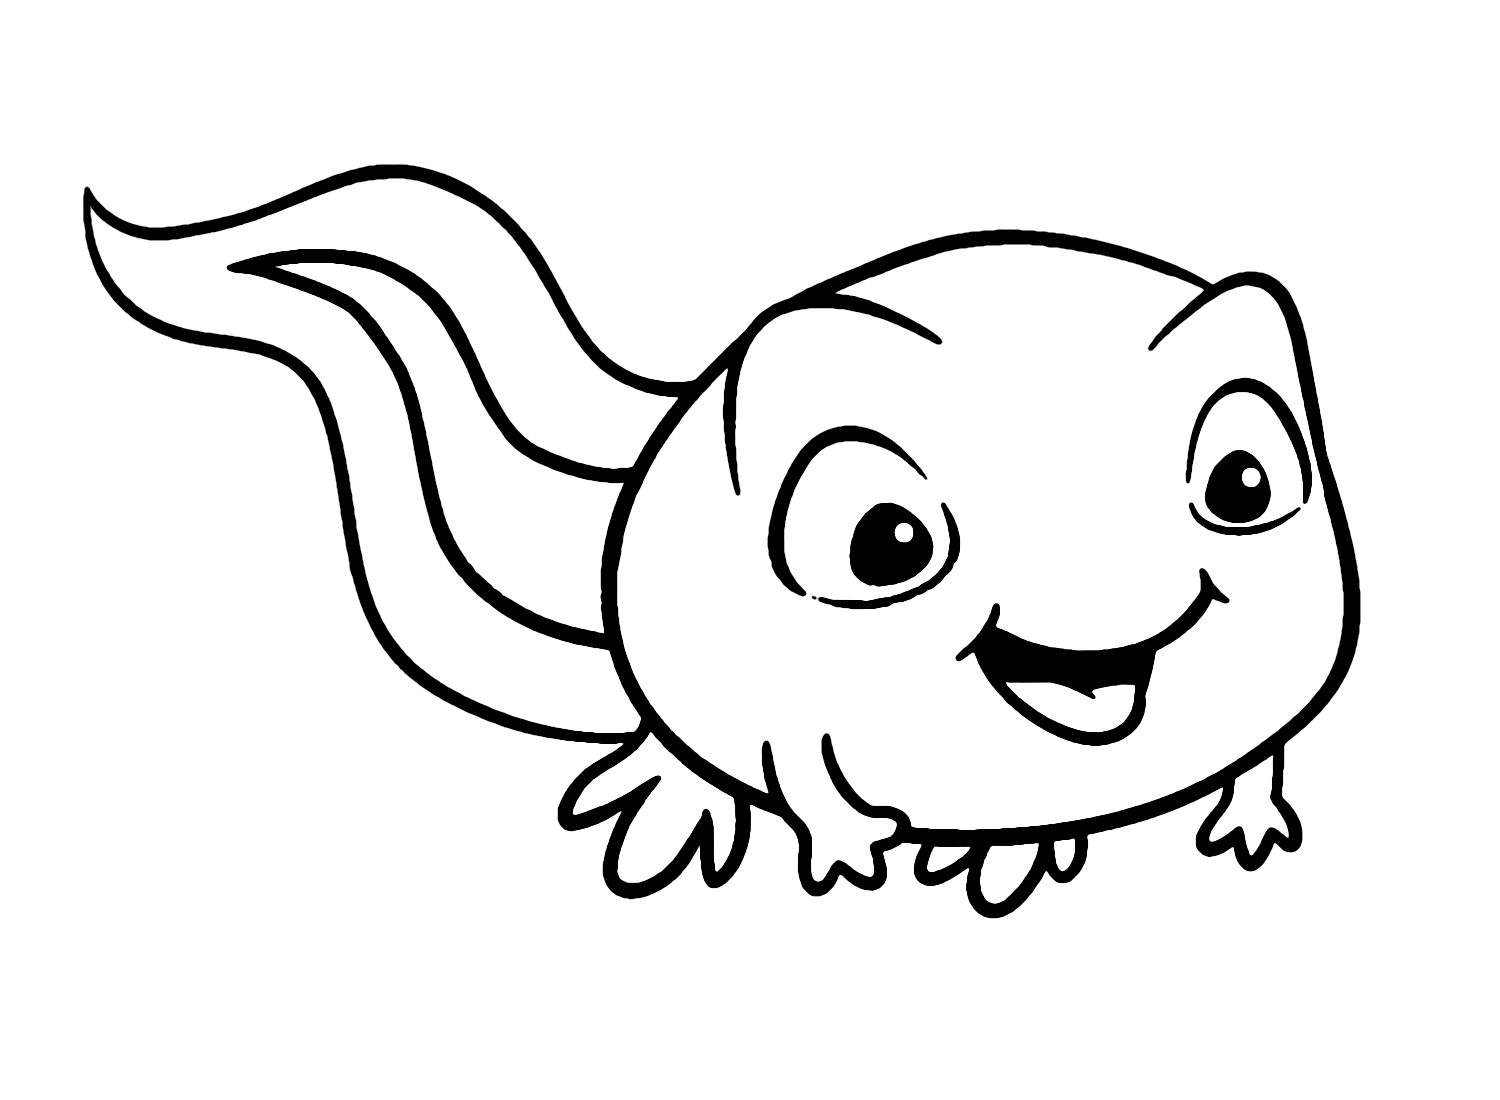 Printable Tadpole Coloring Page